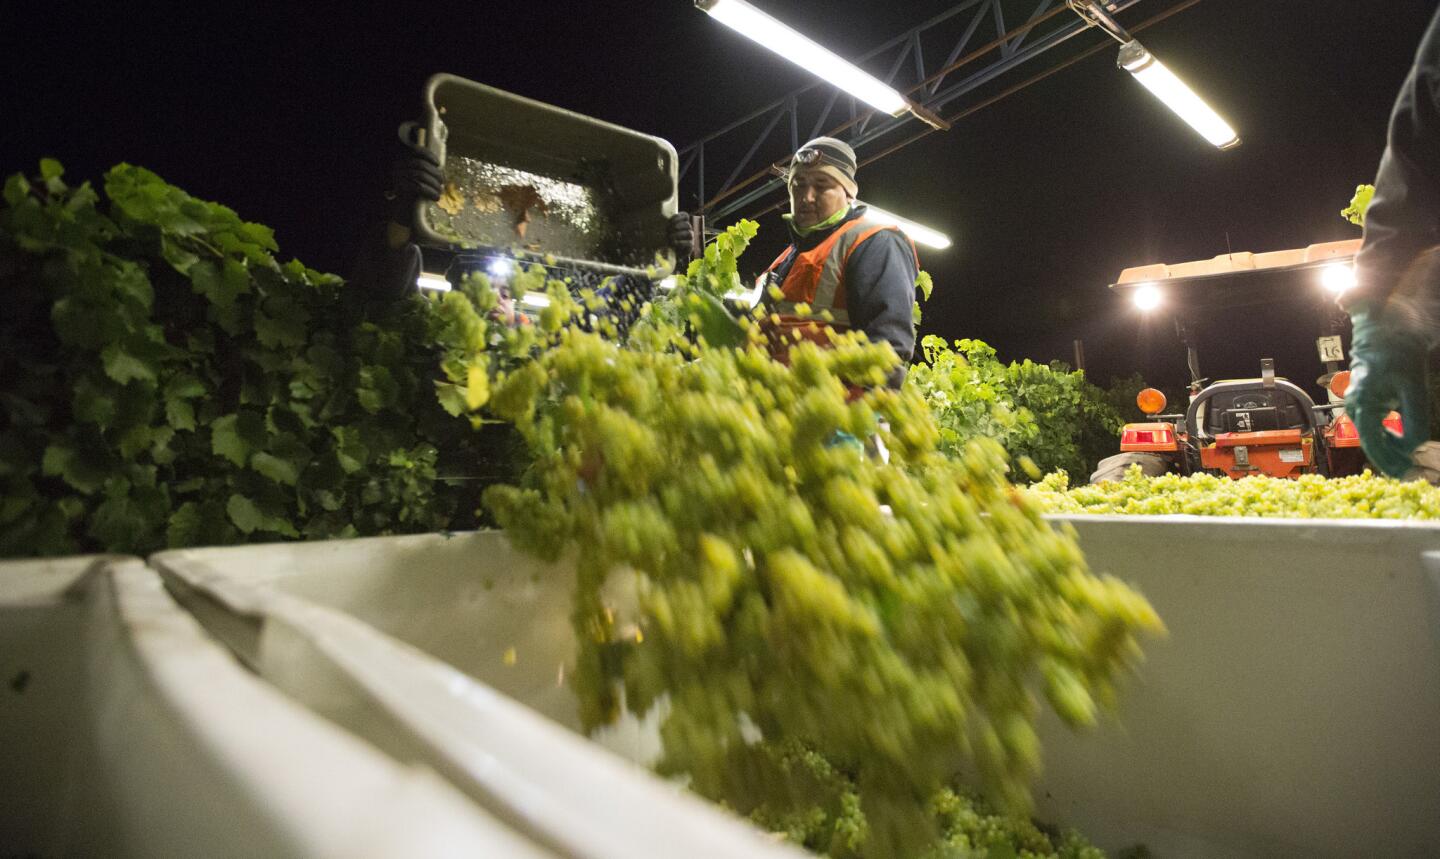 Freshly harvested grapes are thrown into bins at the Sangiacomo Family Vineyard. The industry uses precision irrigation practices that involve complex remote-sensing devices, satellites and drones.